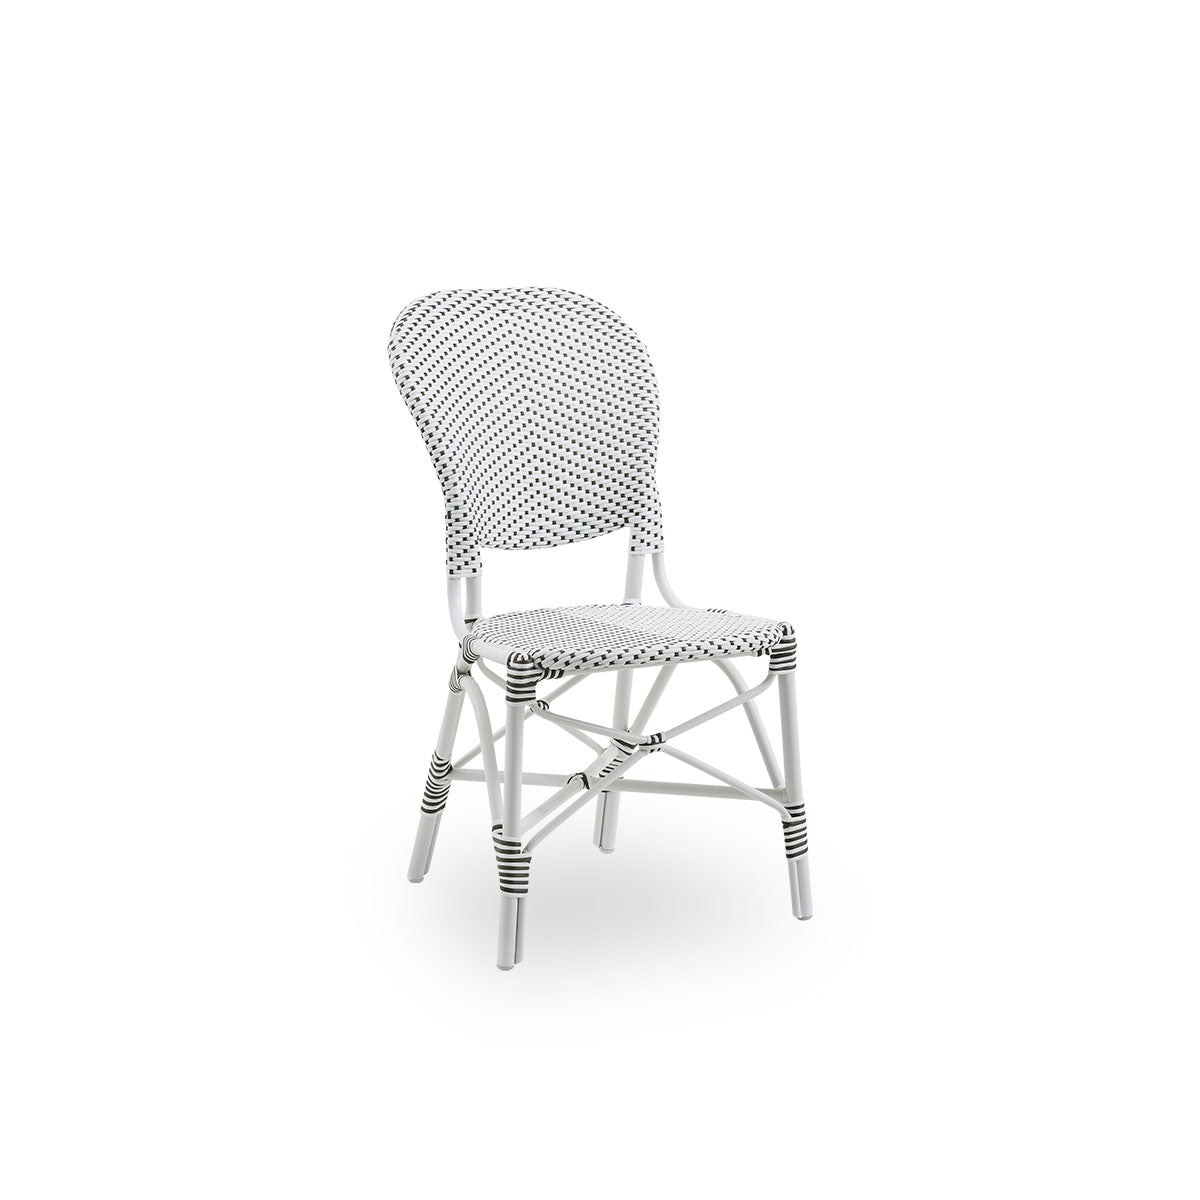 Isabell Exterior Dining Chair | Seat cushion by Sika